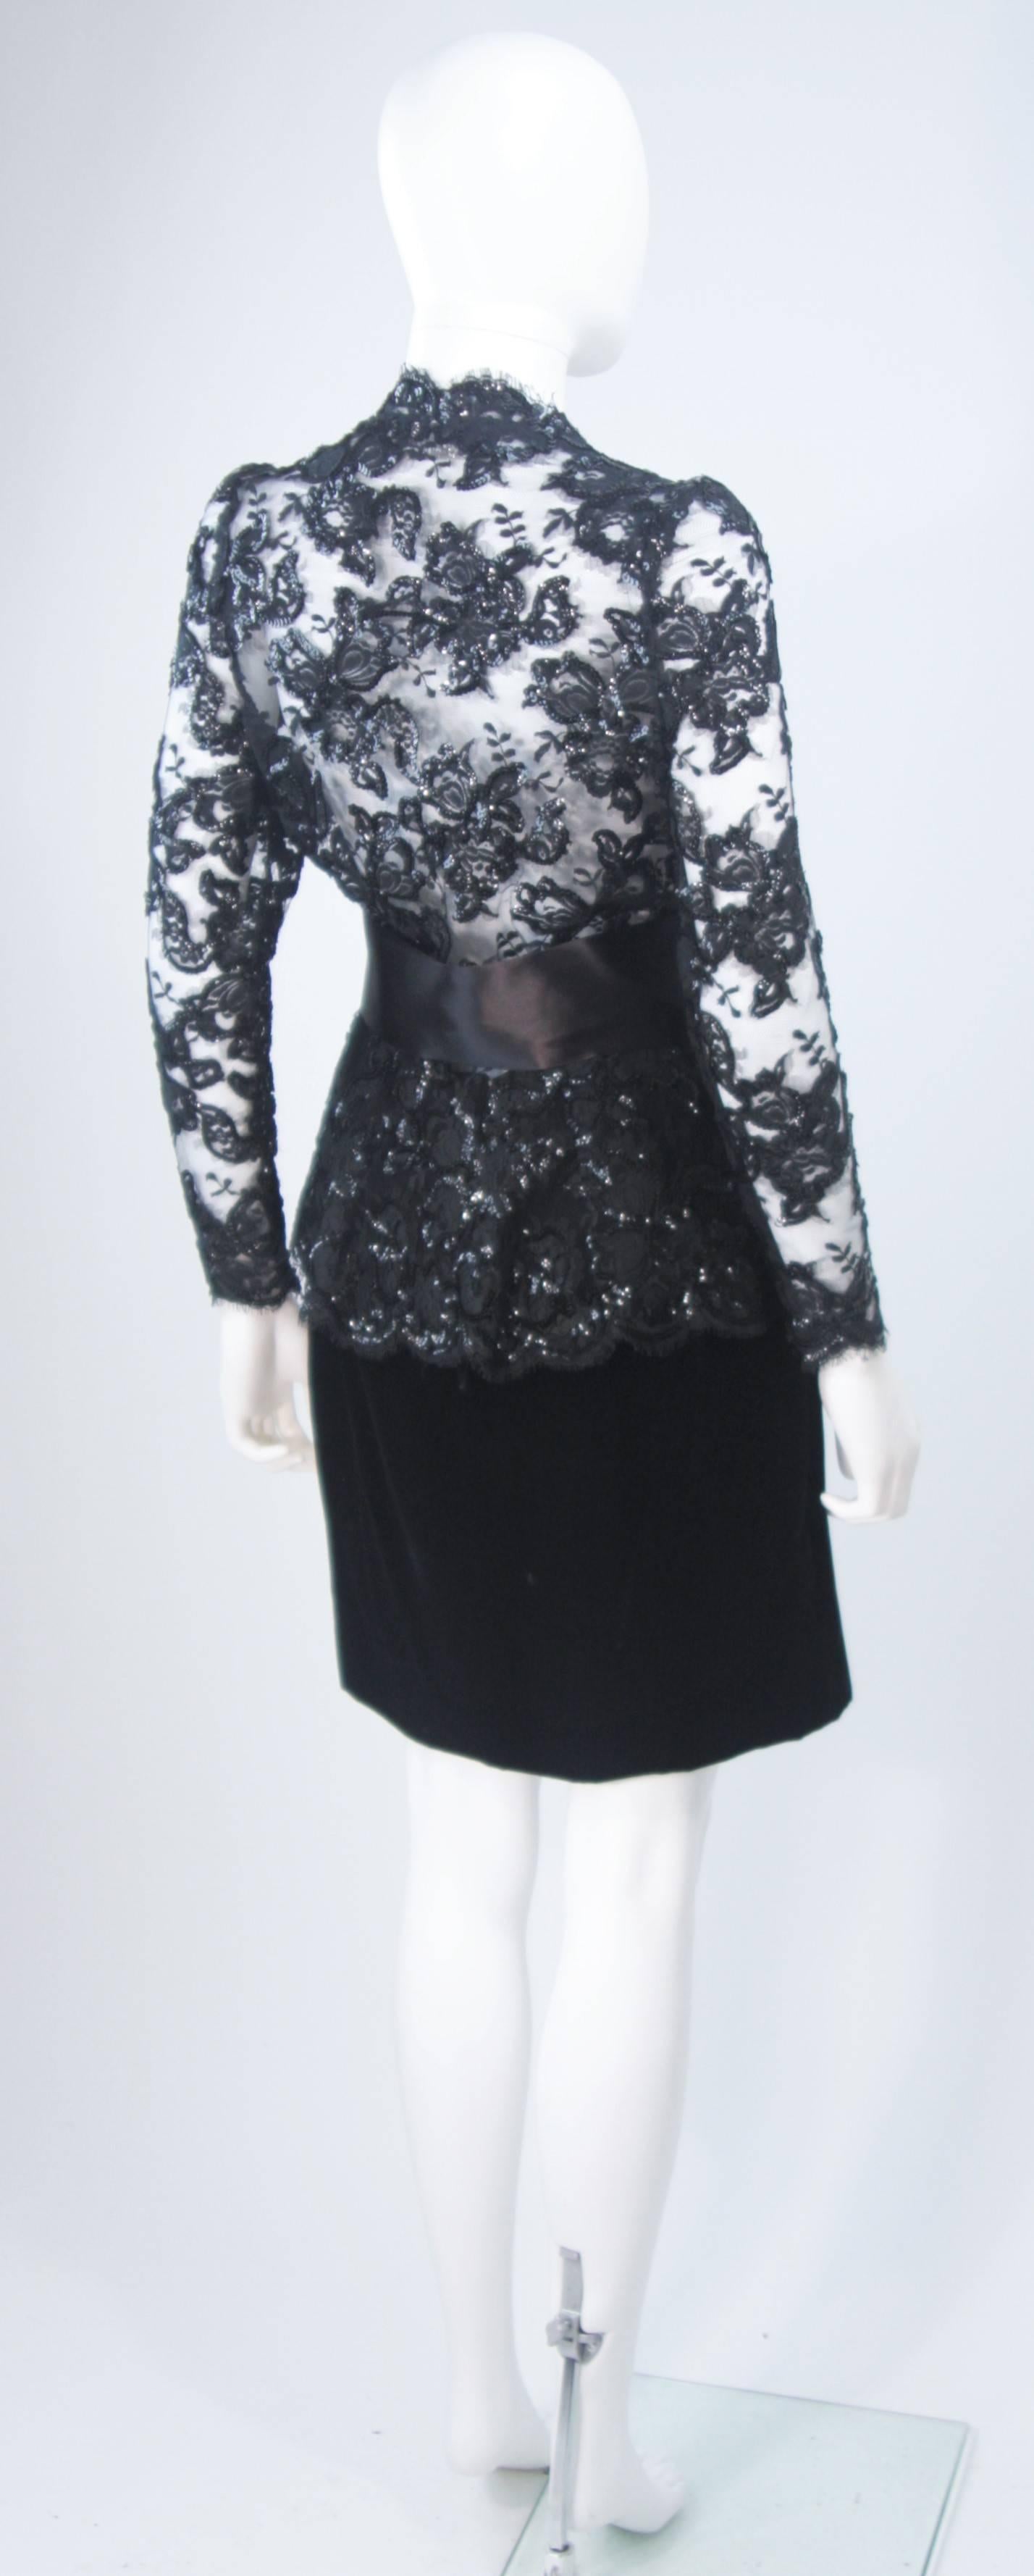 TRAVILLA Black Sequin Lace Skirt Suit with Satin Bow Belt Size 2-4 In Excellent Condition For Sale In Los Angeles, CA